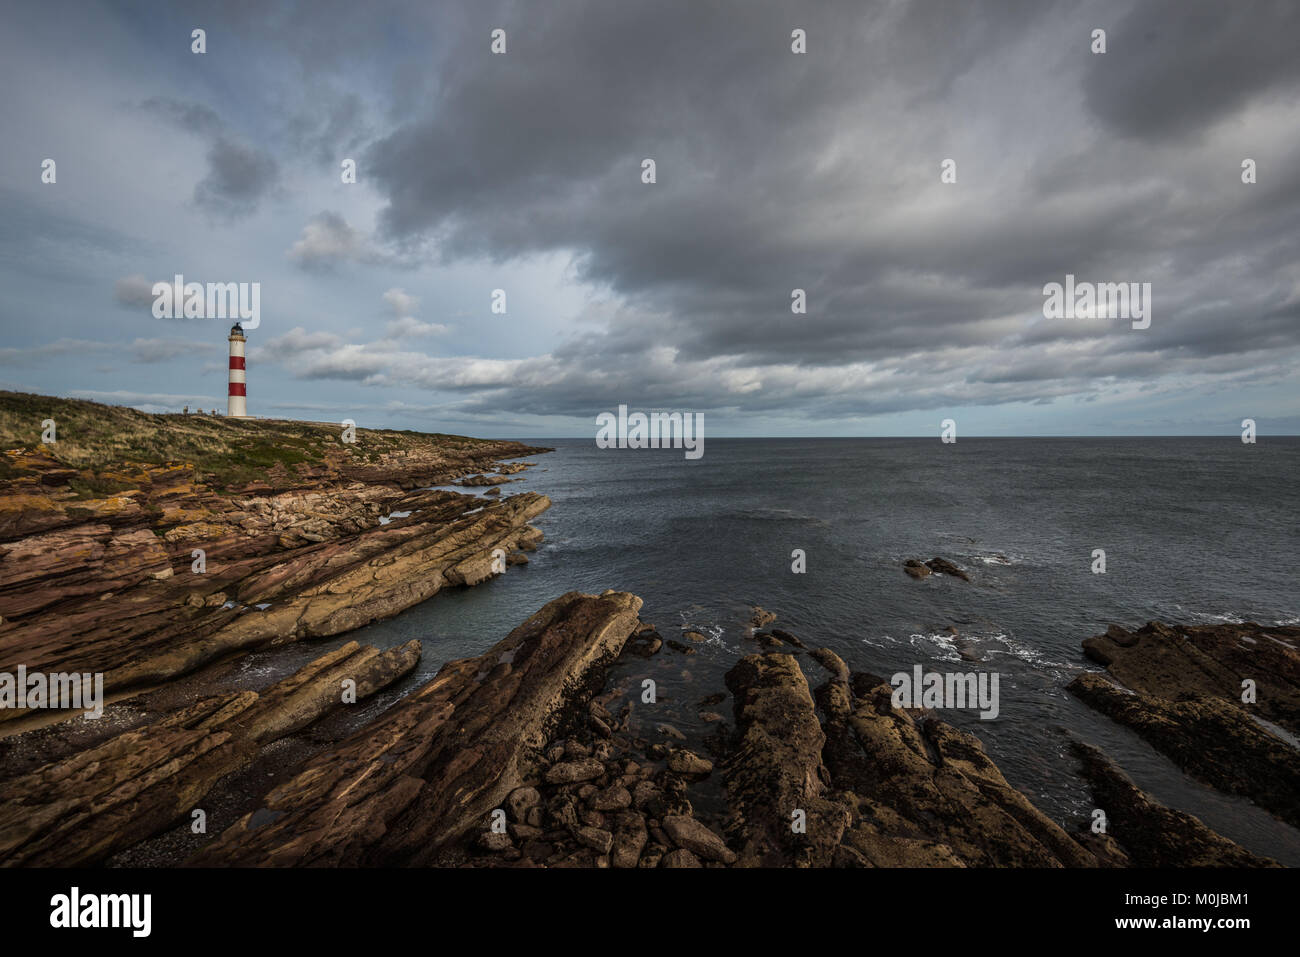 The Tarbat Ness Lighthouse is located at the North West tip of the Tarbat Ness peninsula near the fishing village of Portmahomack in Scotland. Stock Photo